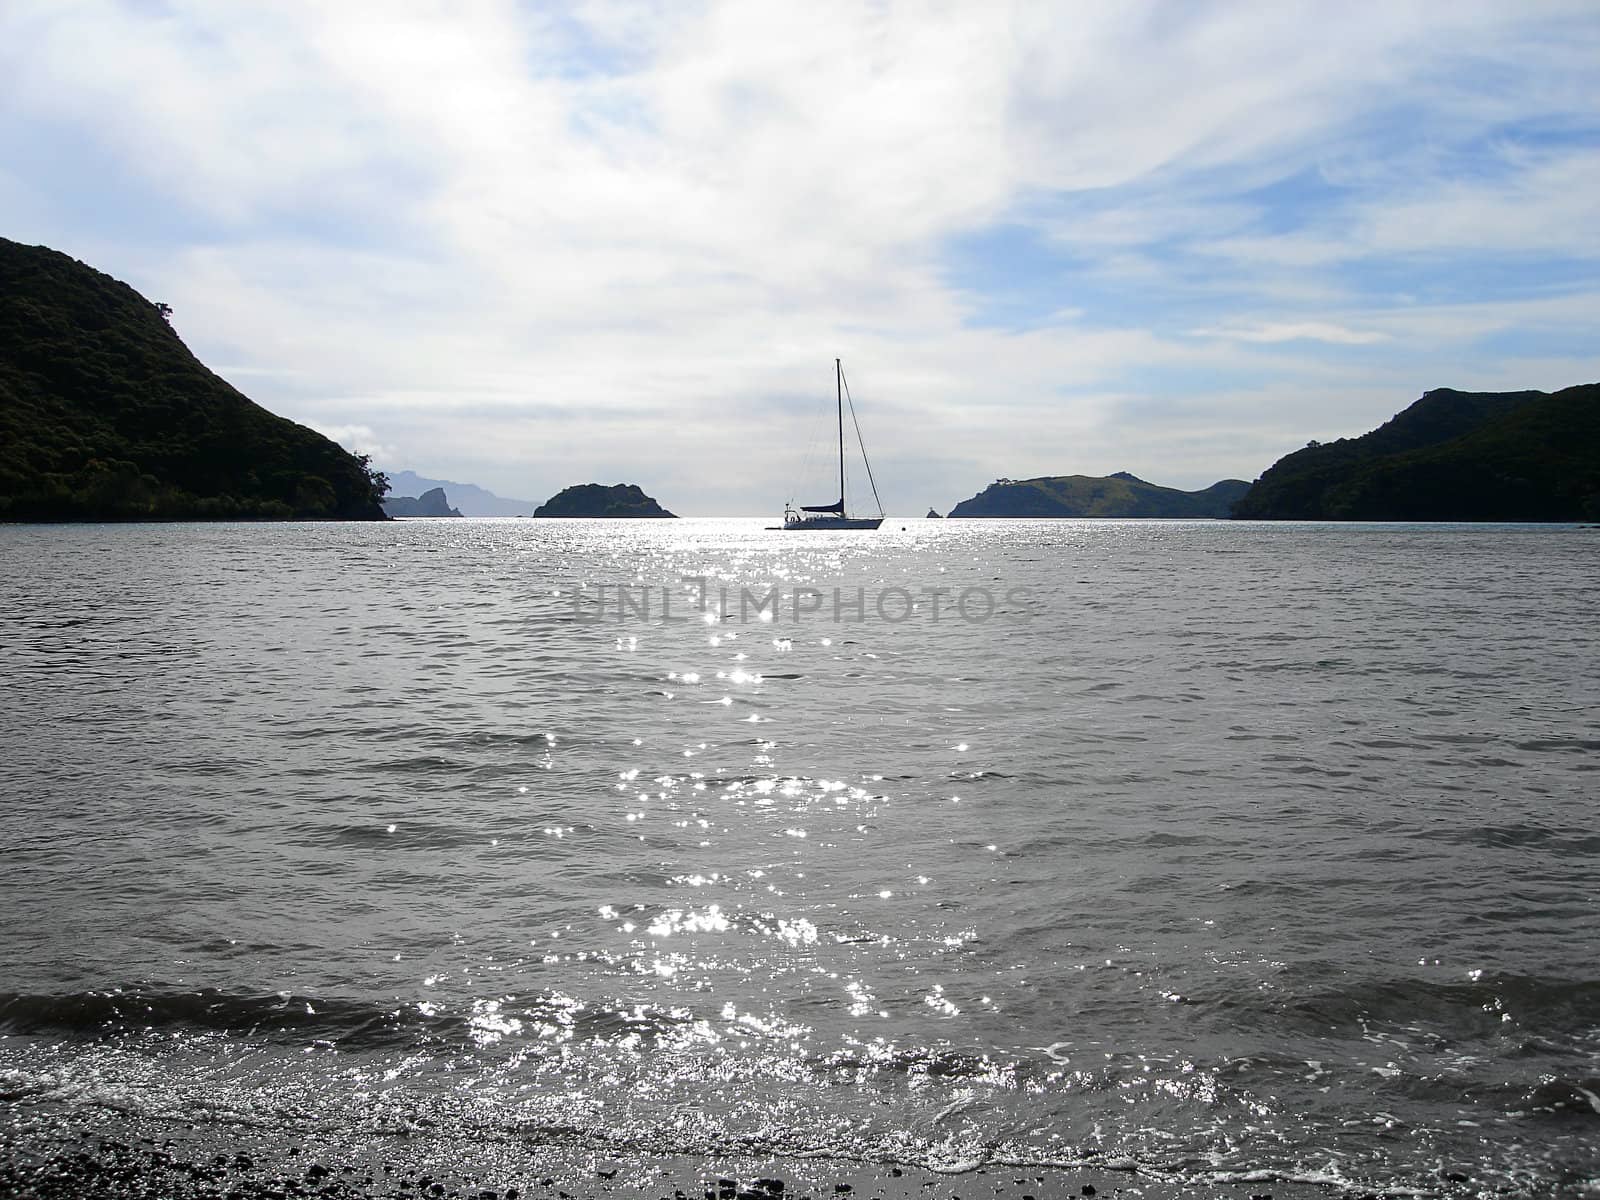 Sailing Yacht at Rest, Great Barrier Island, New Zealand by Cloudia